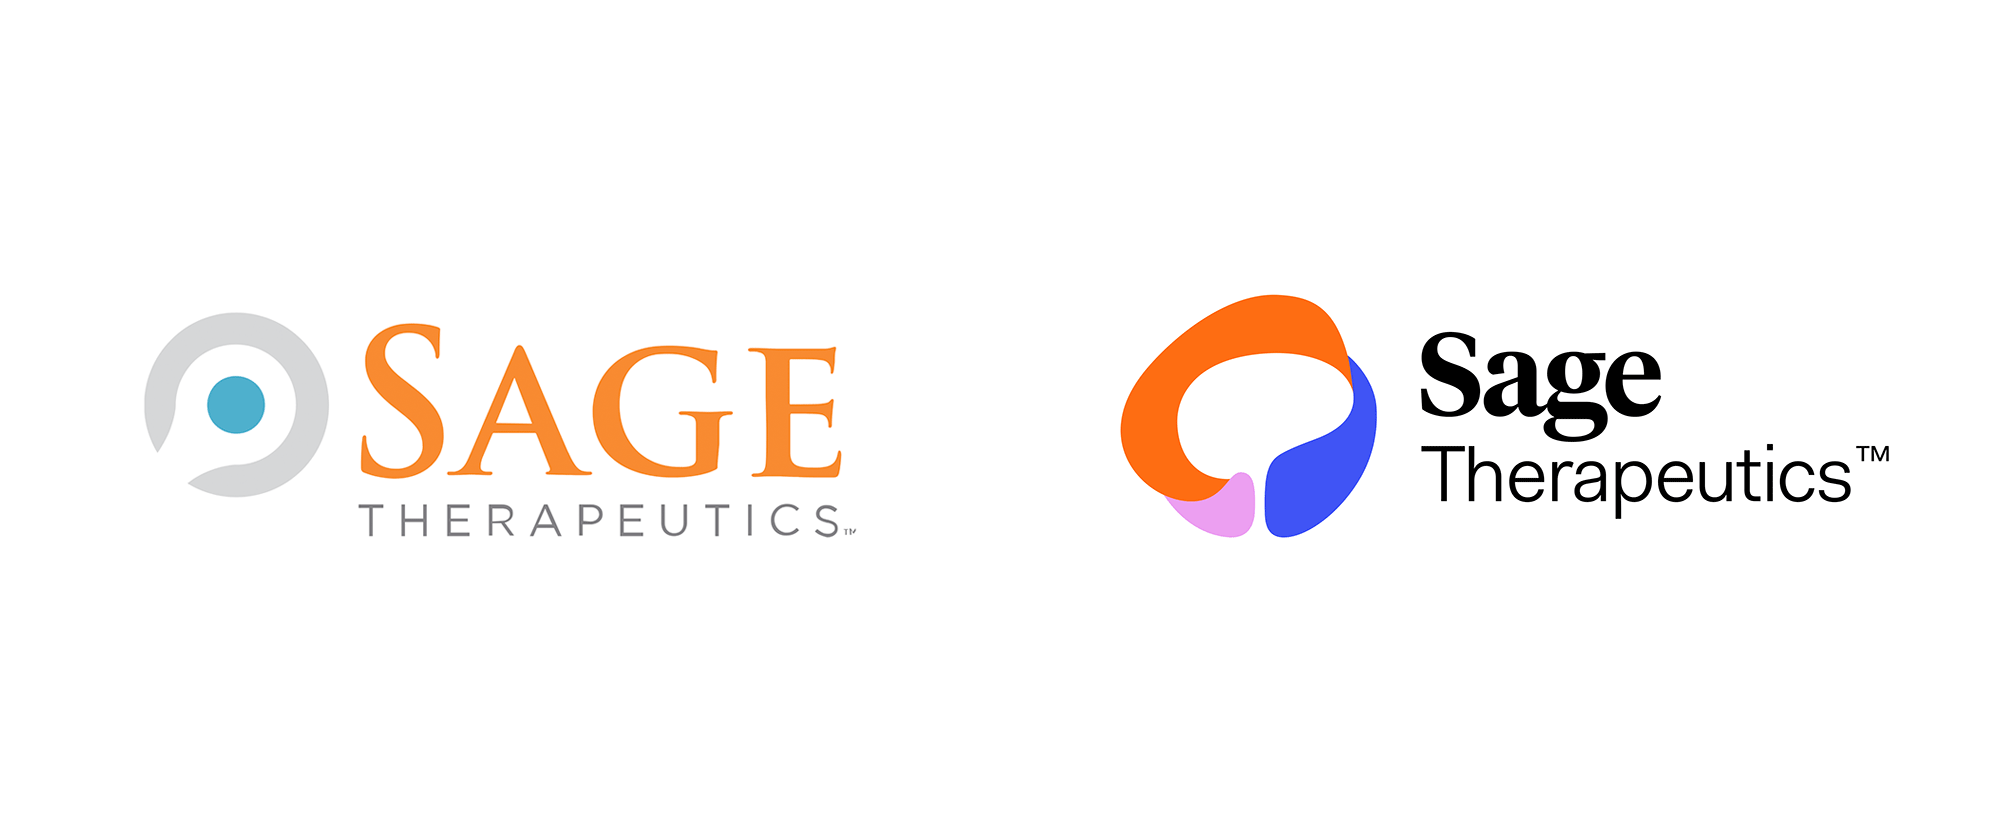 Noted New Logo and Identity for Sage Therapeutics by Wolff Olins